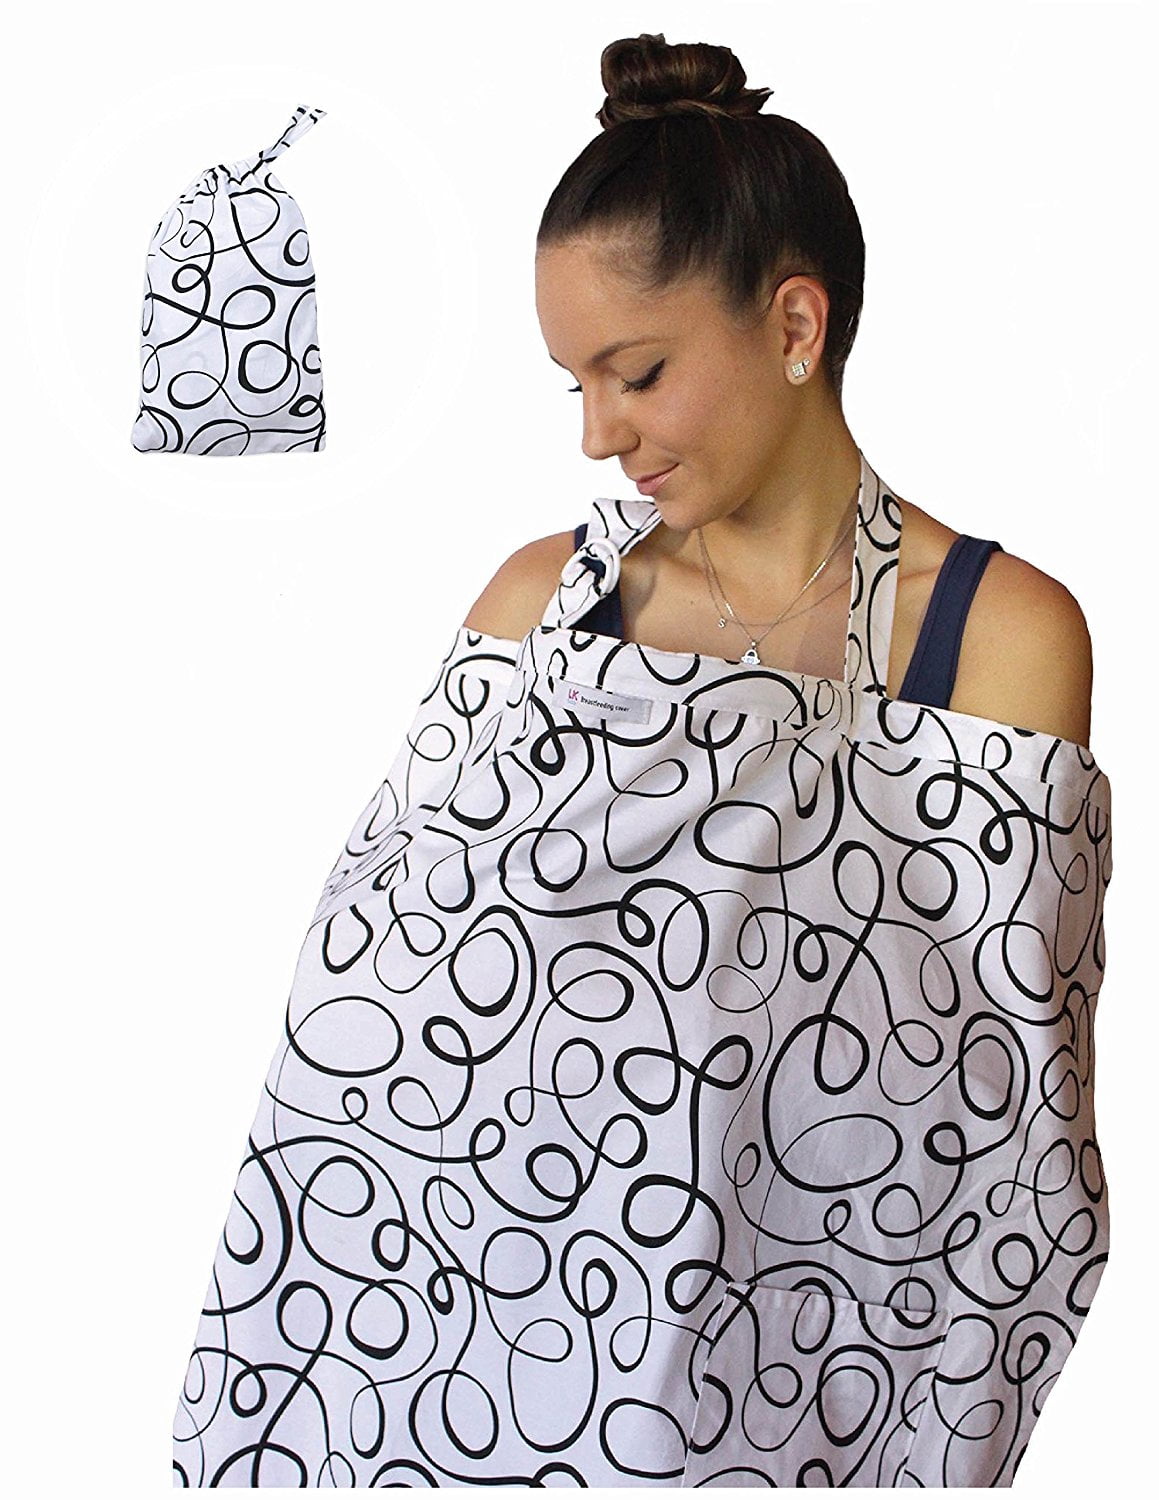 Baby Apron Breastfeeding Cover Free Matching Pouch for Mum Breast Feeding Babies in Public 